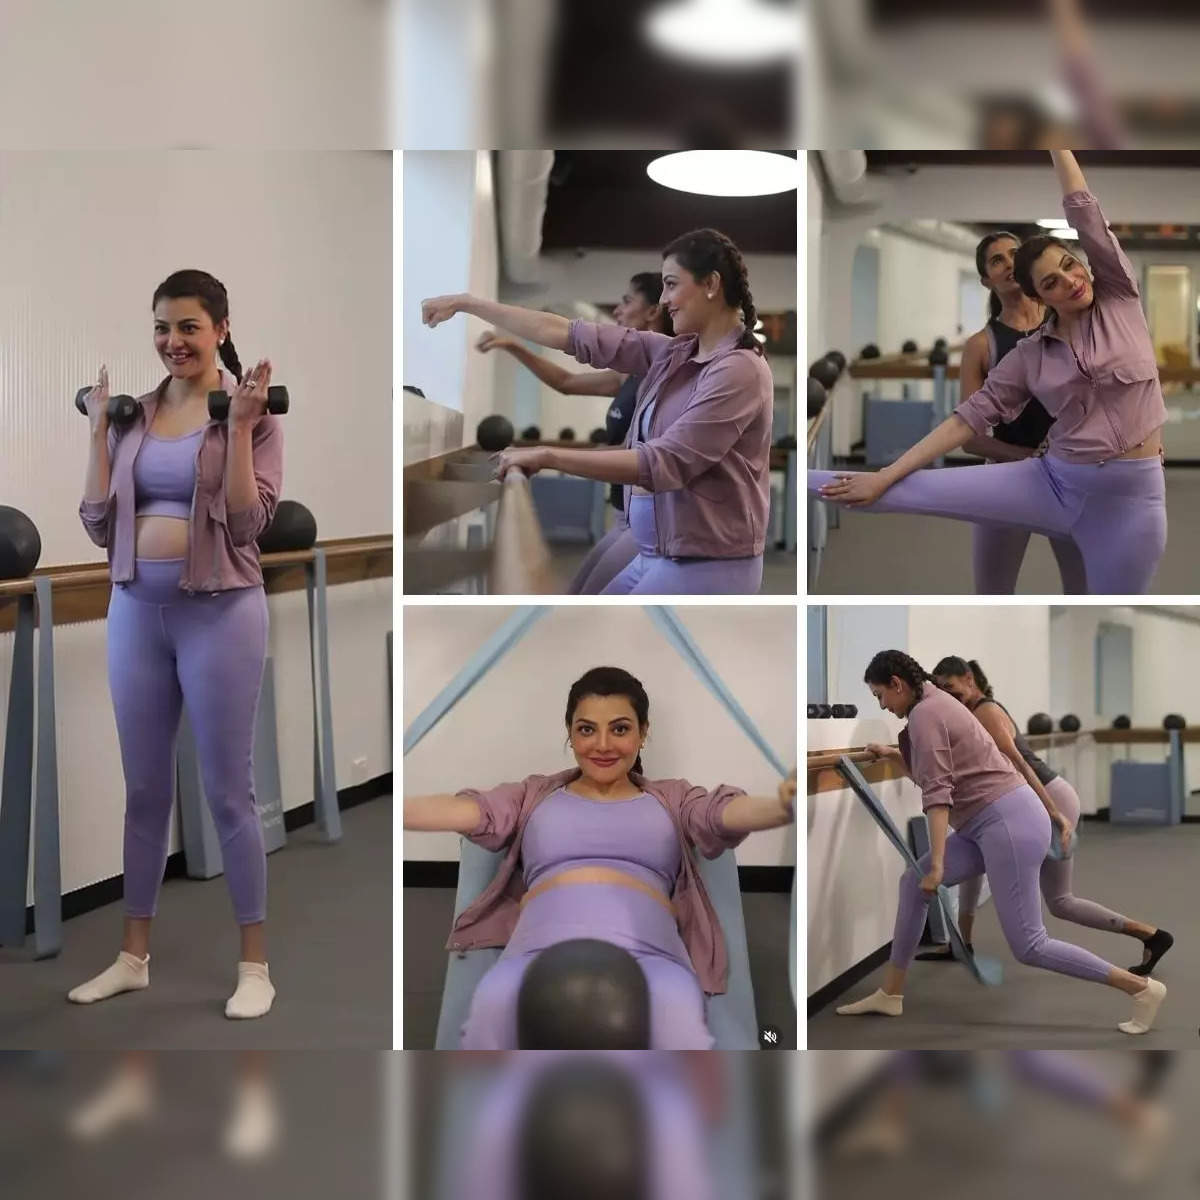 Kajal Aggarwal practises aerobic conditioning during pregnancy, says it  helps her feel stronger & leaner - The Economic Times